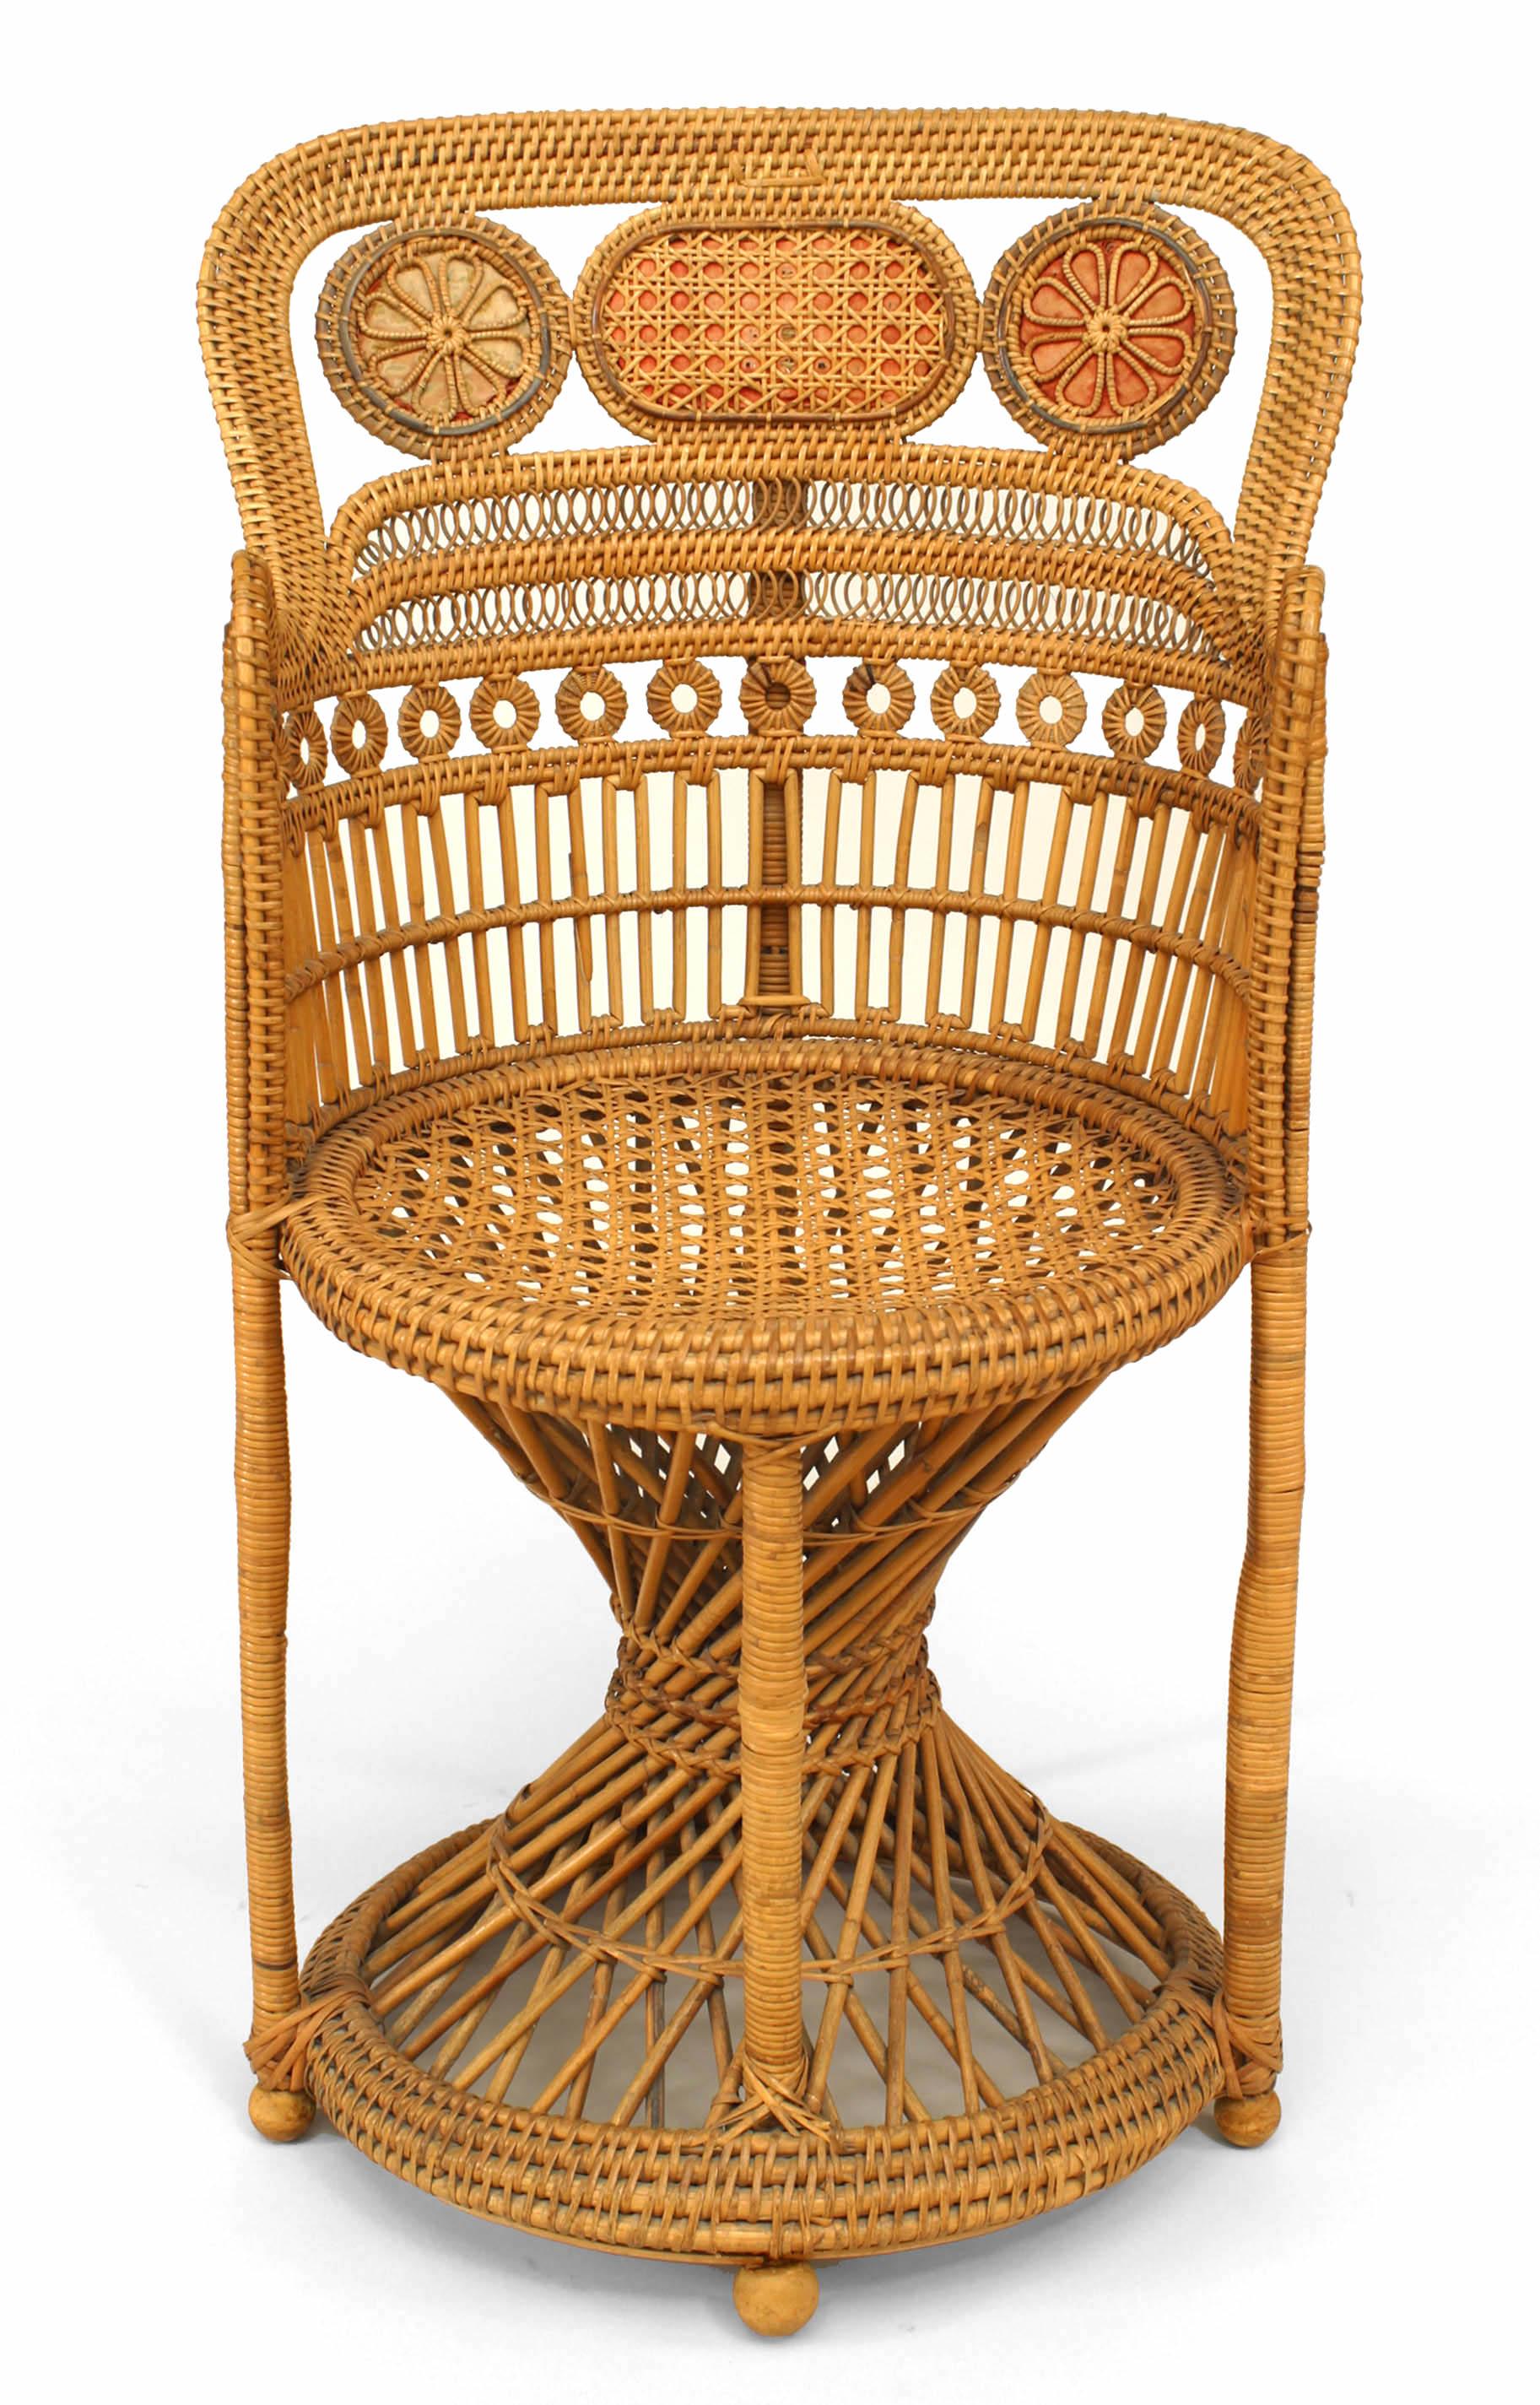 English Regency style (19th Cent) Brighton design natural wicker round back arm chair with hour glass base.
